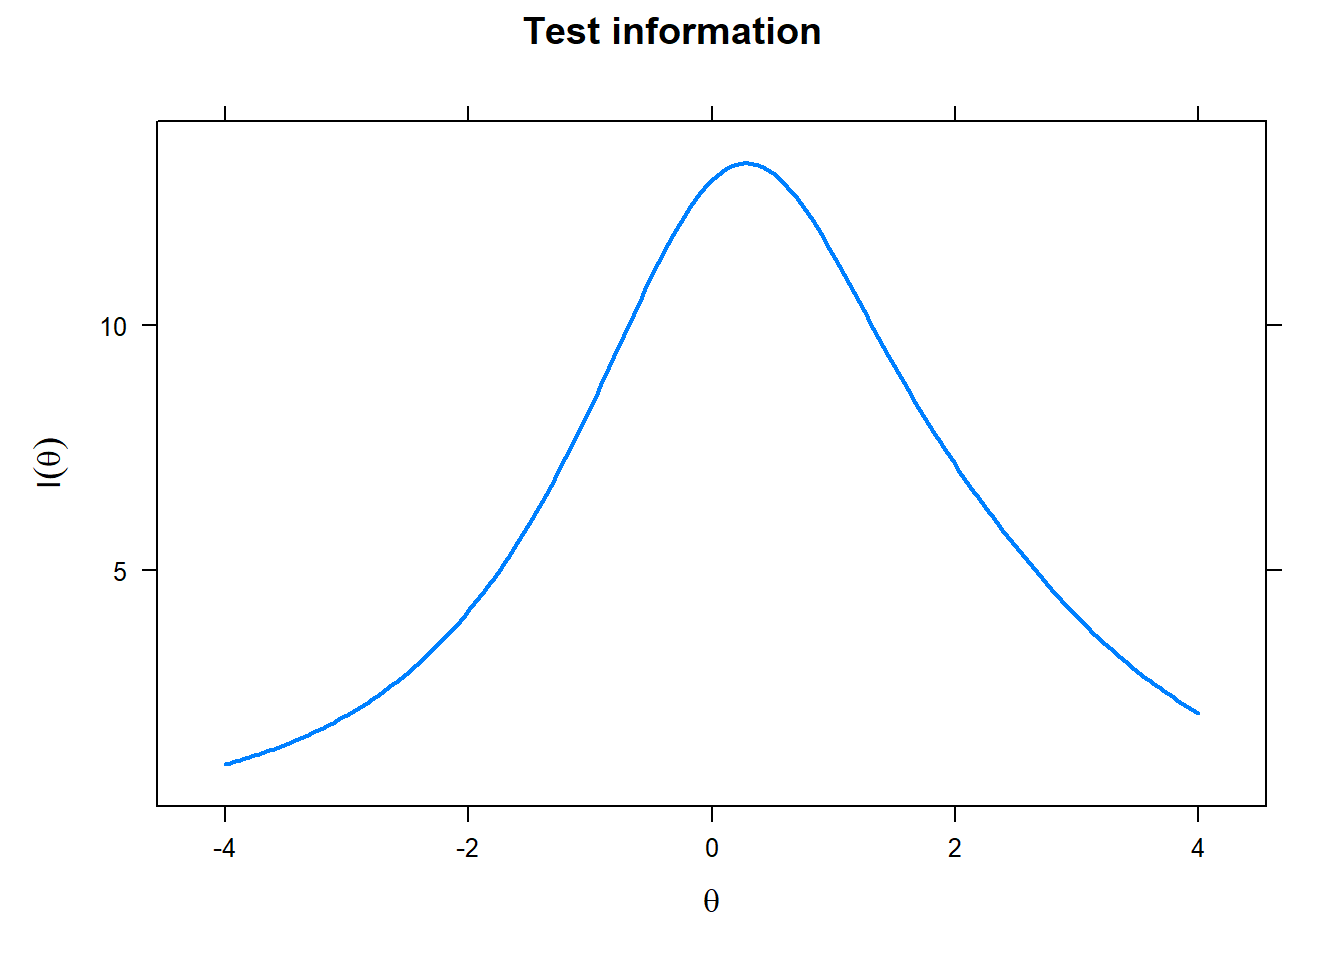 Test information curve: Realistic